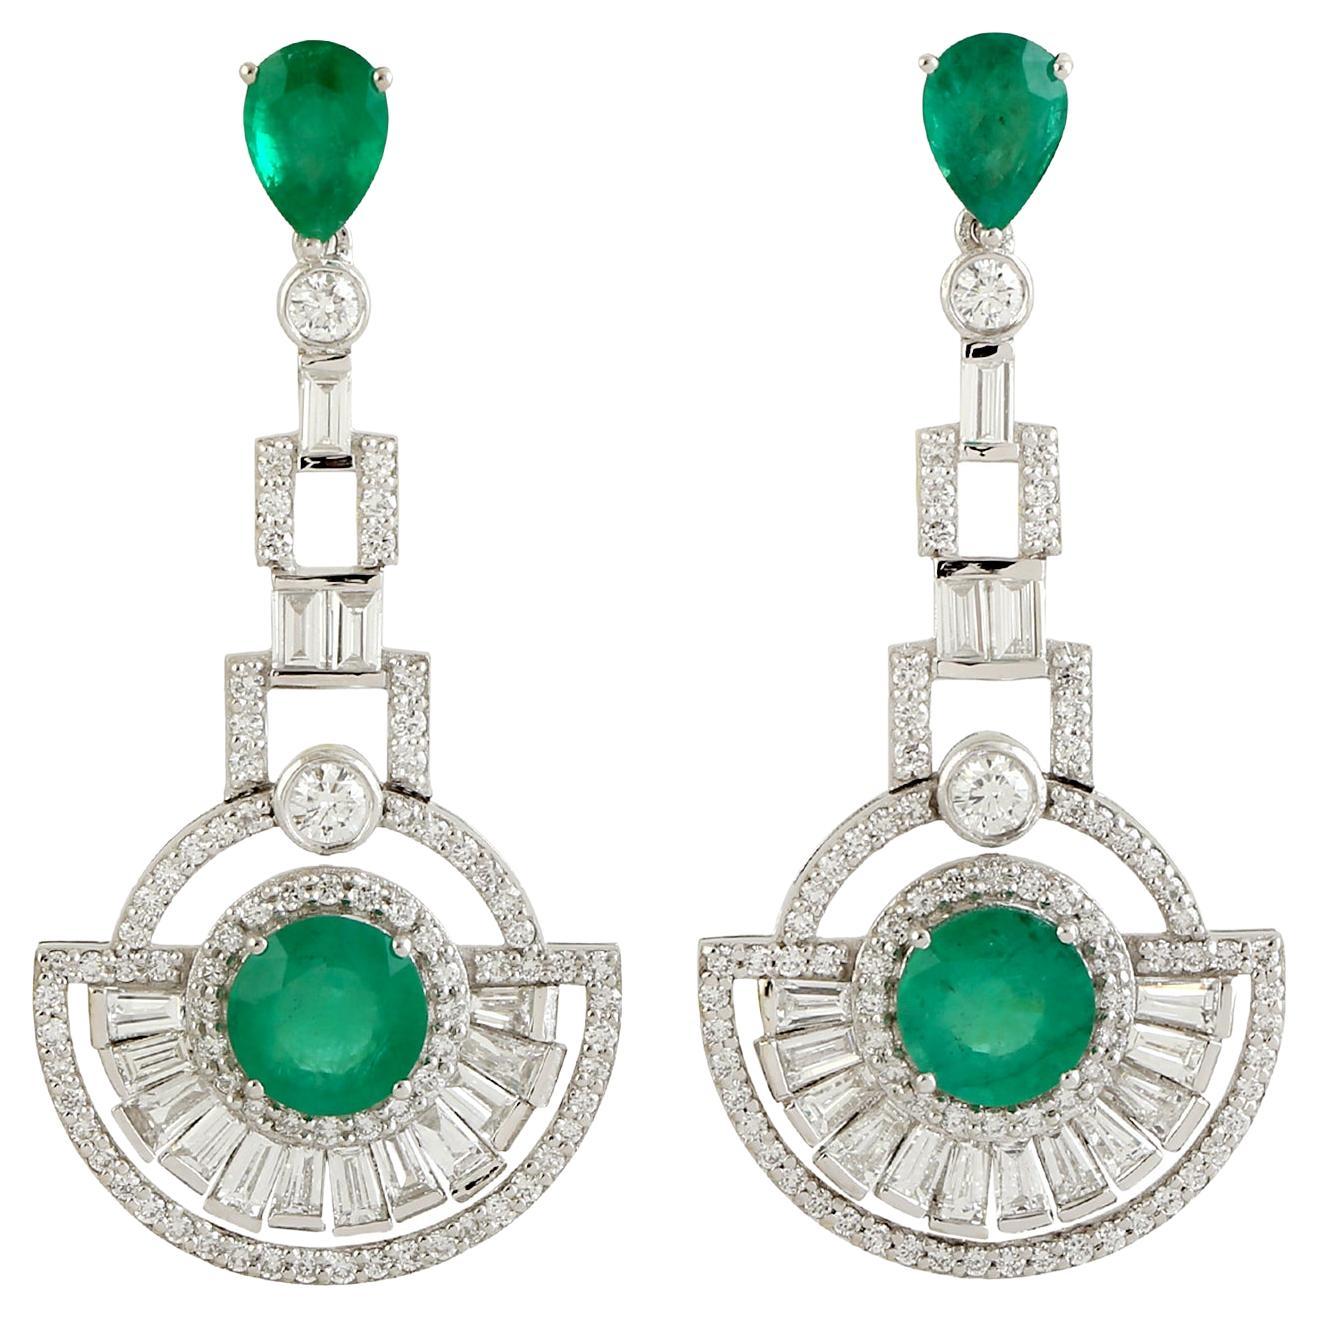 Half Circle Dangle Earrings With Emerald & Diamonds Made In 18k White Gold For Sale